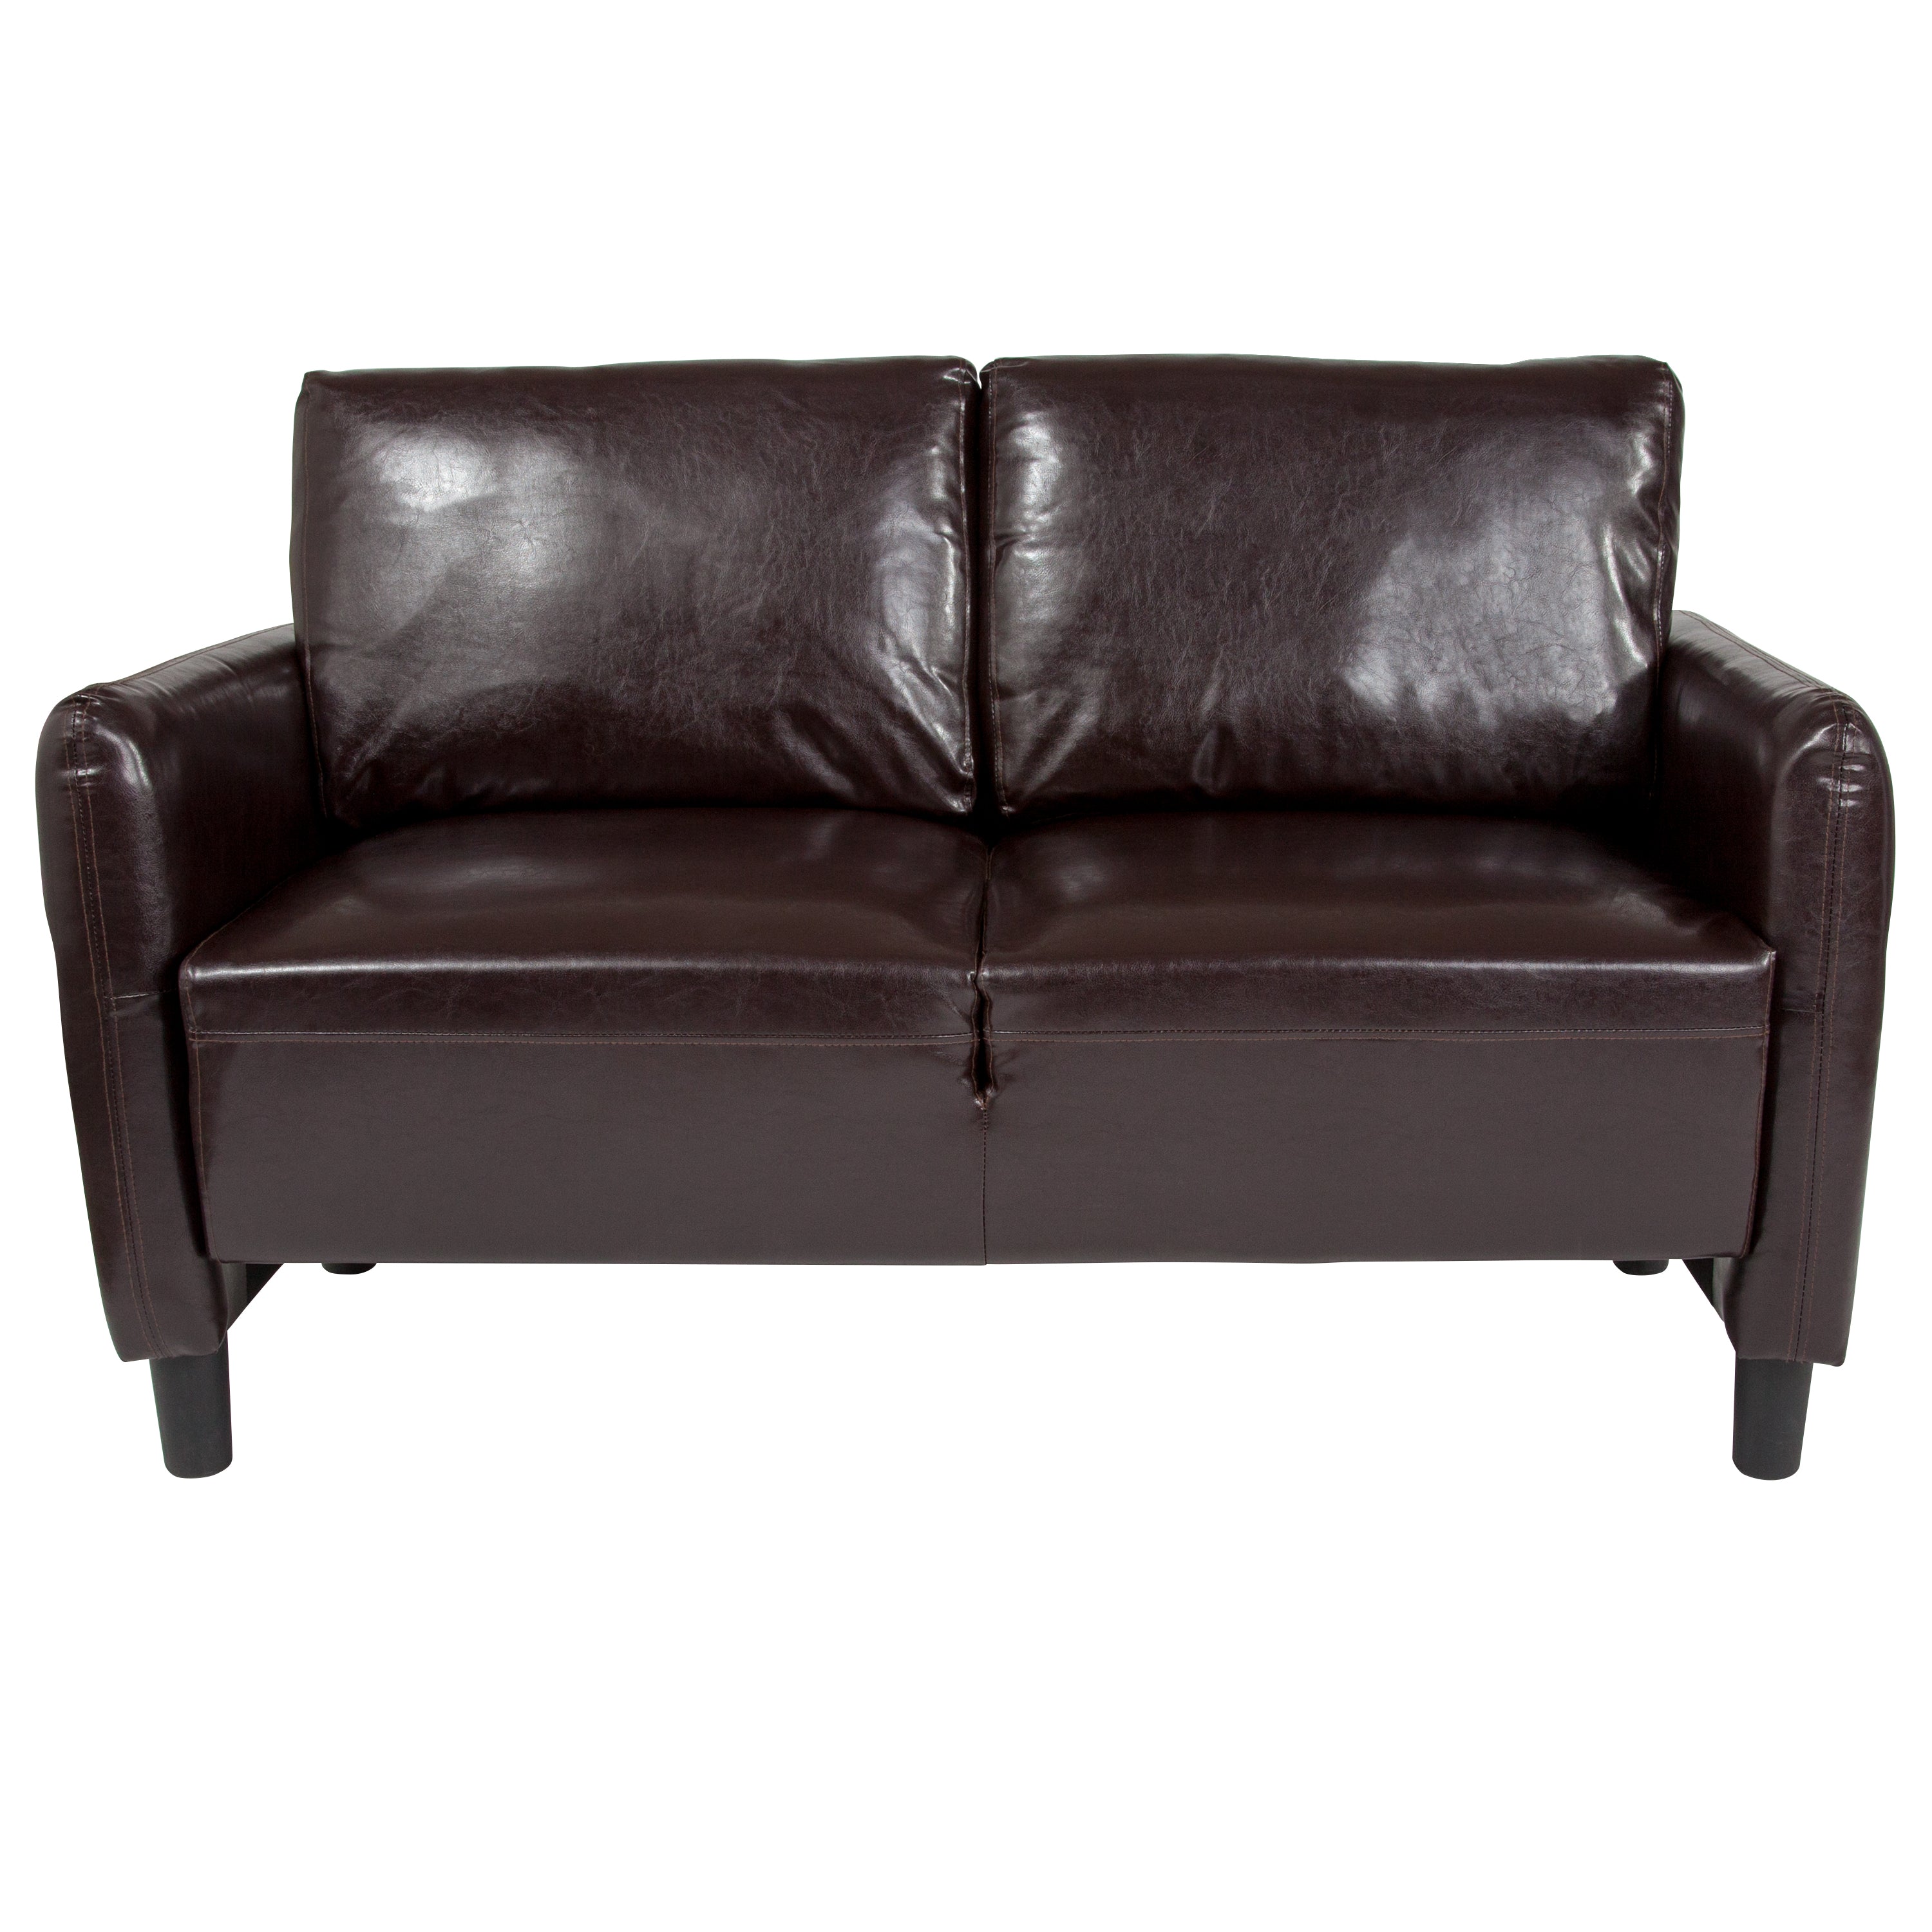 Candler Park LeatherSoft Loveseat-Loveseat-Flash Furniture-Wall2Wall Furnishings